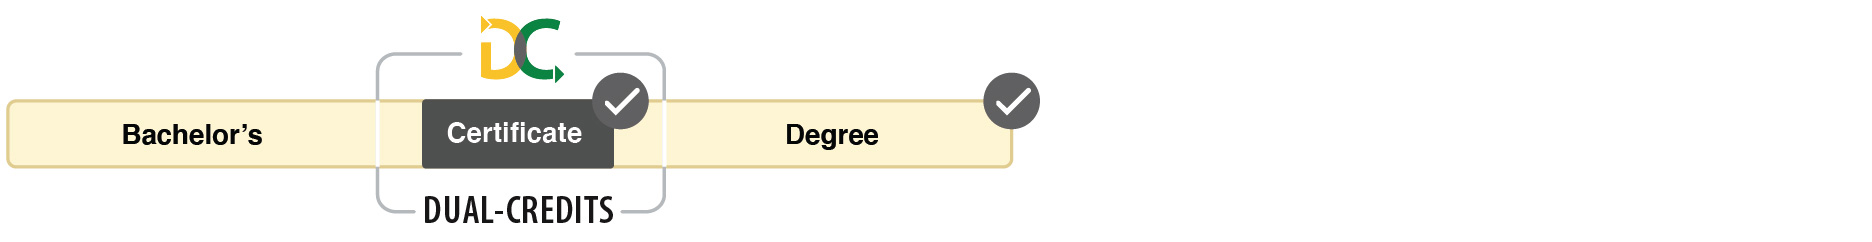 Bachelor's Degree and Master's Degree bars are equal length